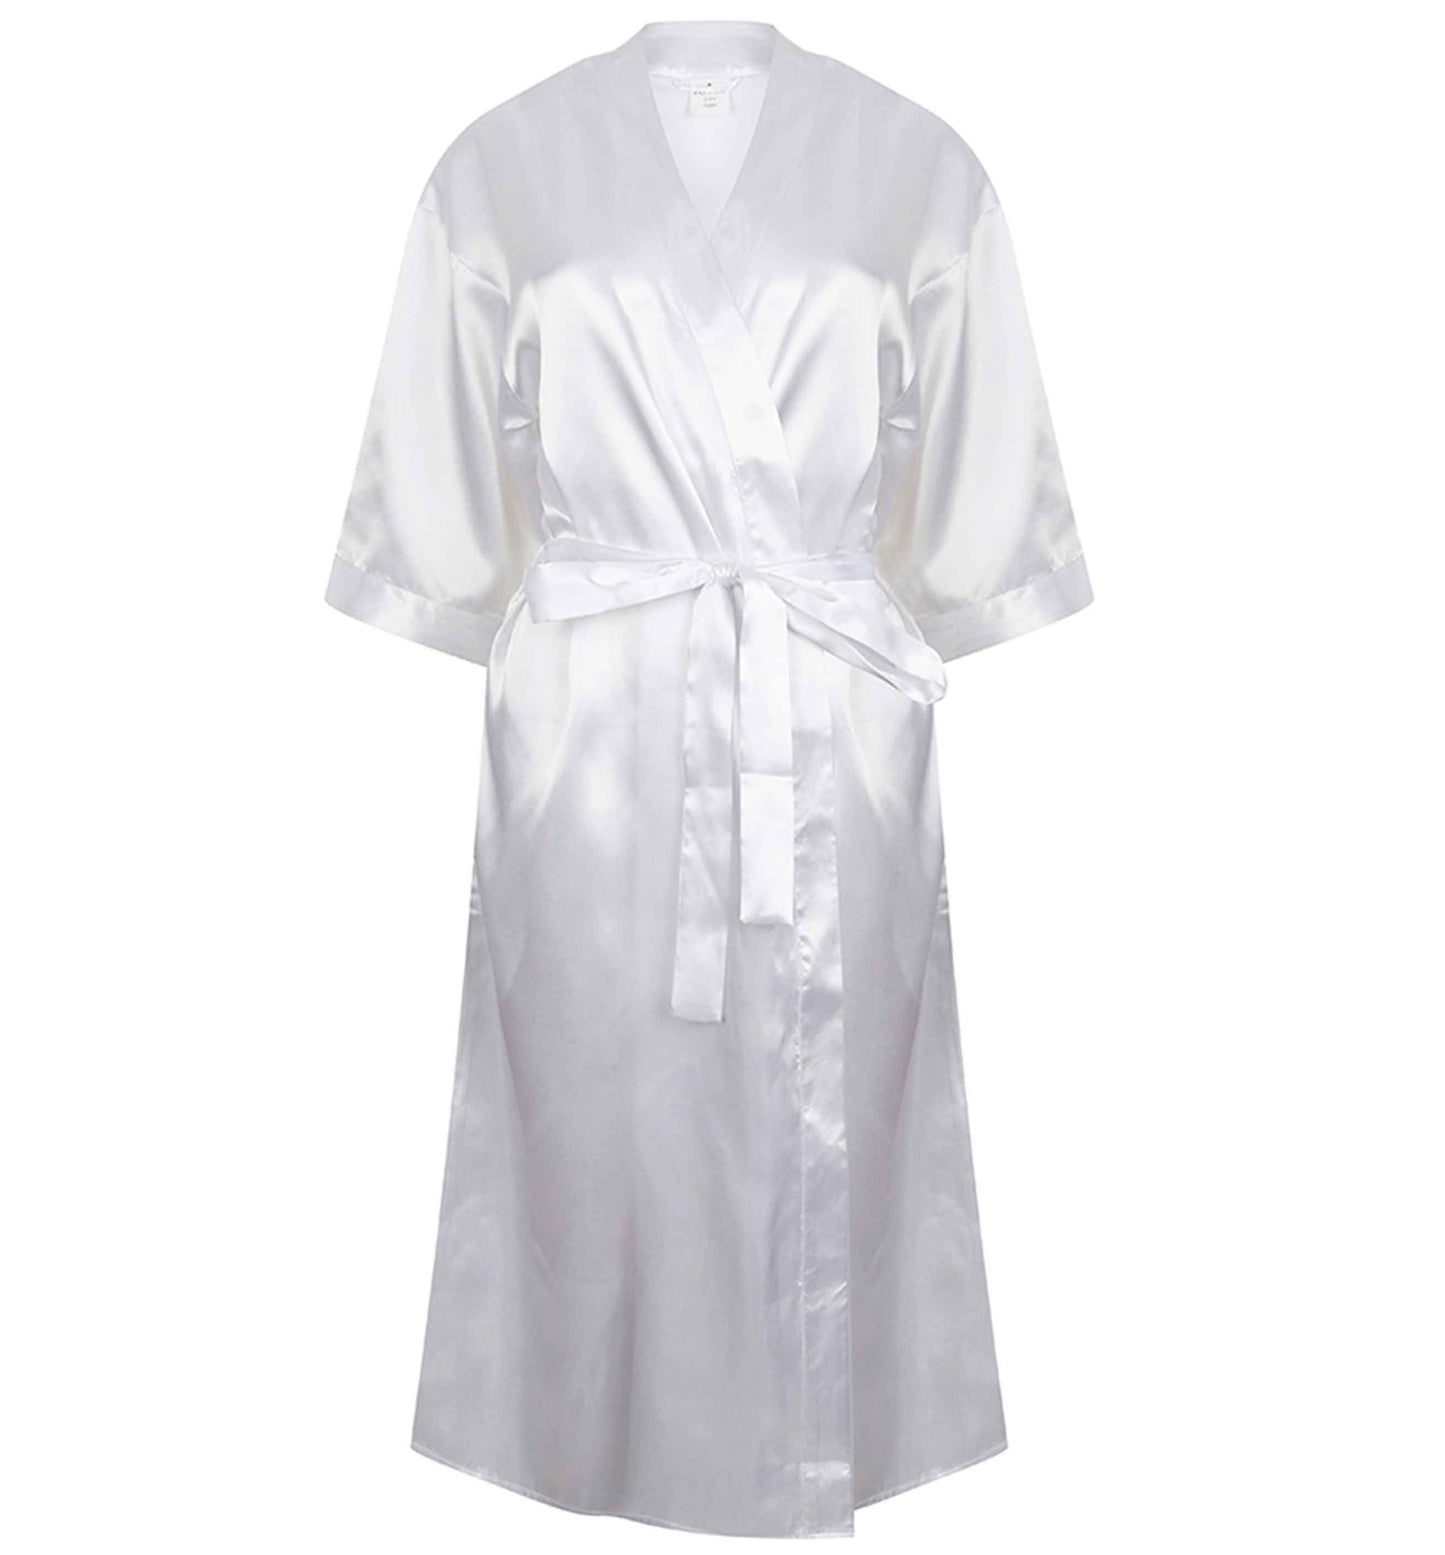 Married at sea blue anchors |  8-18 | Kimono style satin robe | Ladies dressing gown